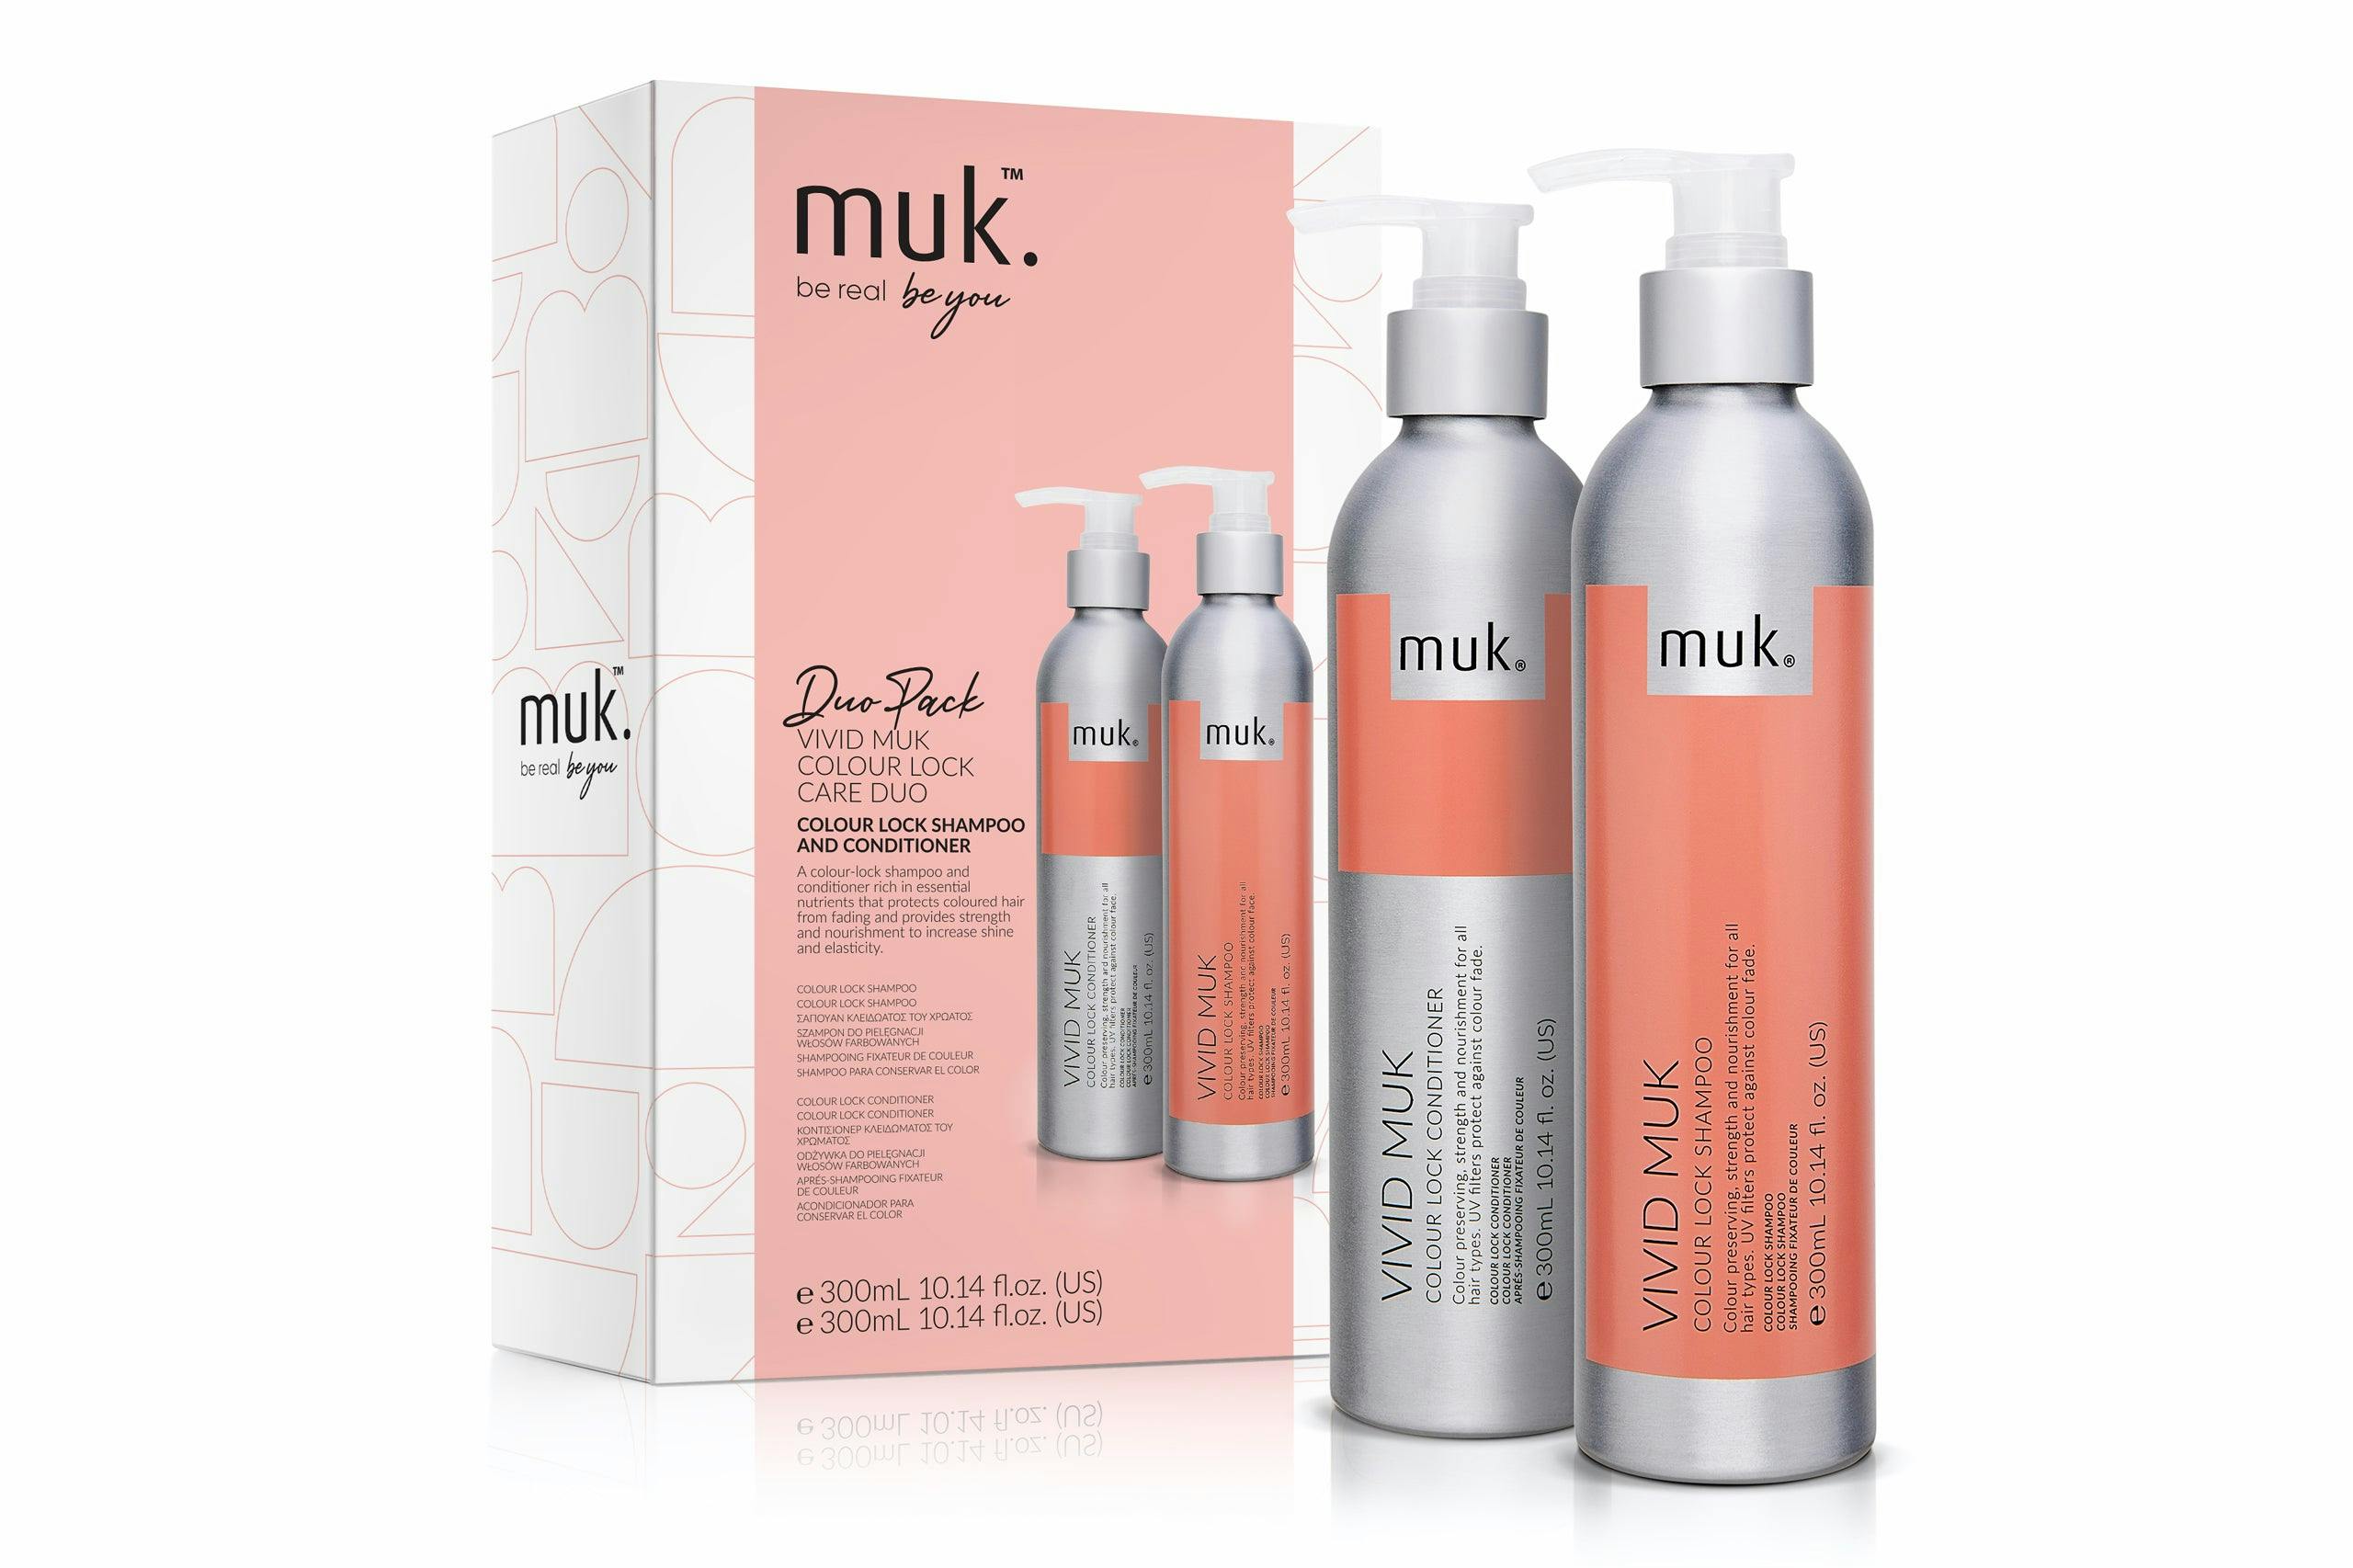 Muk Vivid Muk Colour Lock Shampoo and Conditioner 300ml Duo Pack